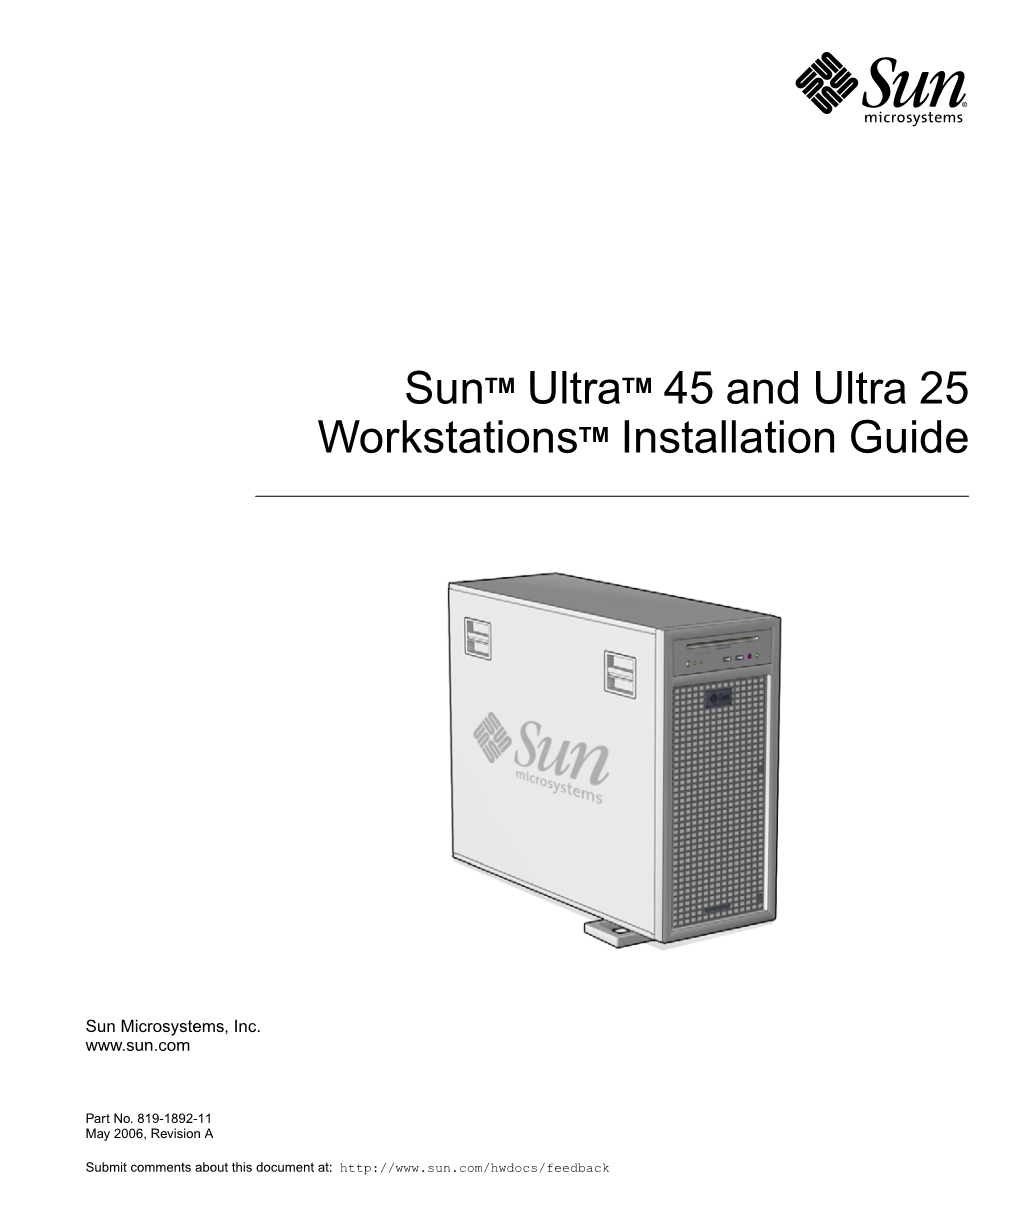 Sun Ultra 45 and Ultra 25 Workstations Installation Guide ¥ May 2006 How to Get Technical Support 47